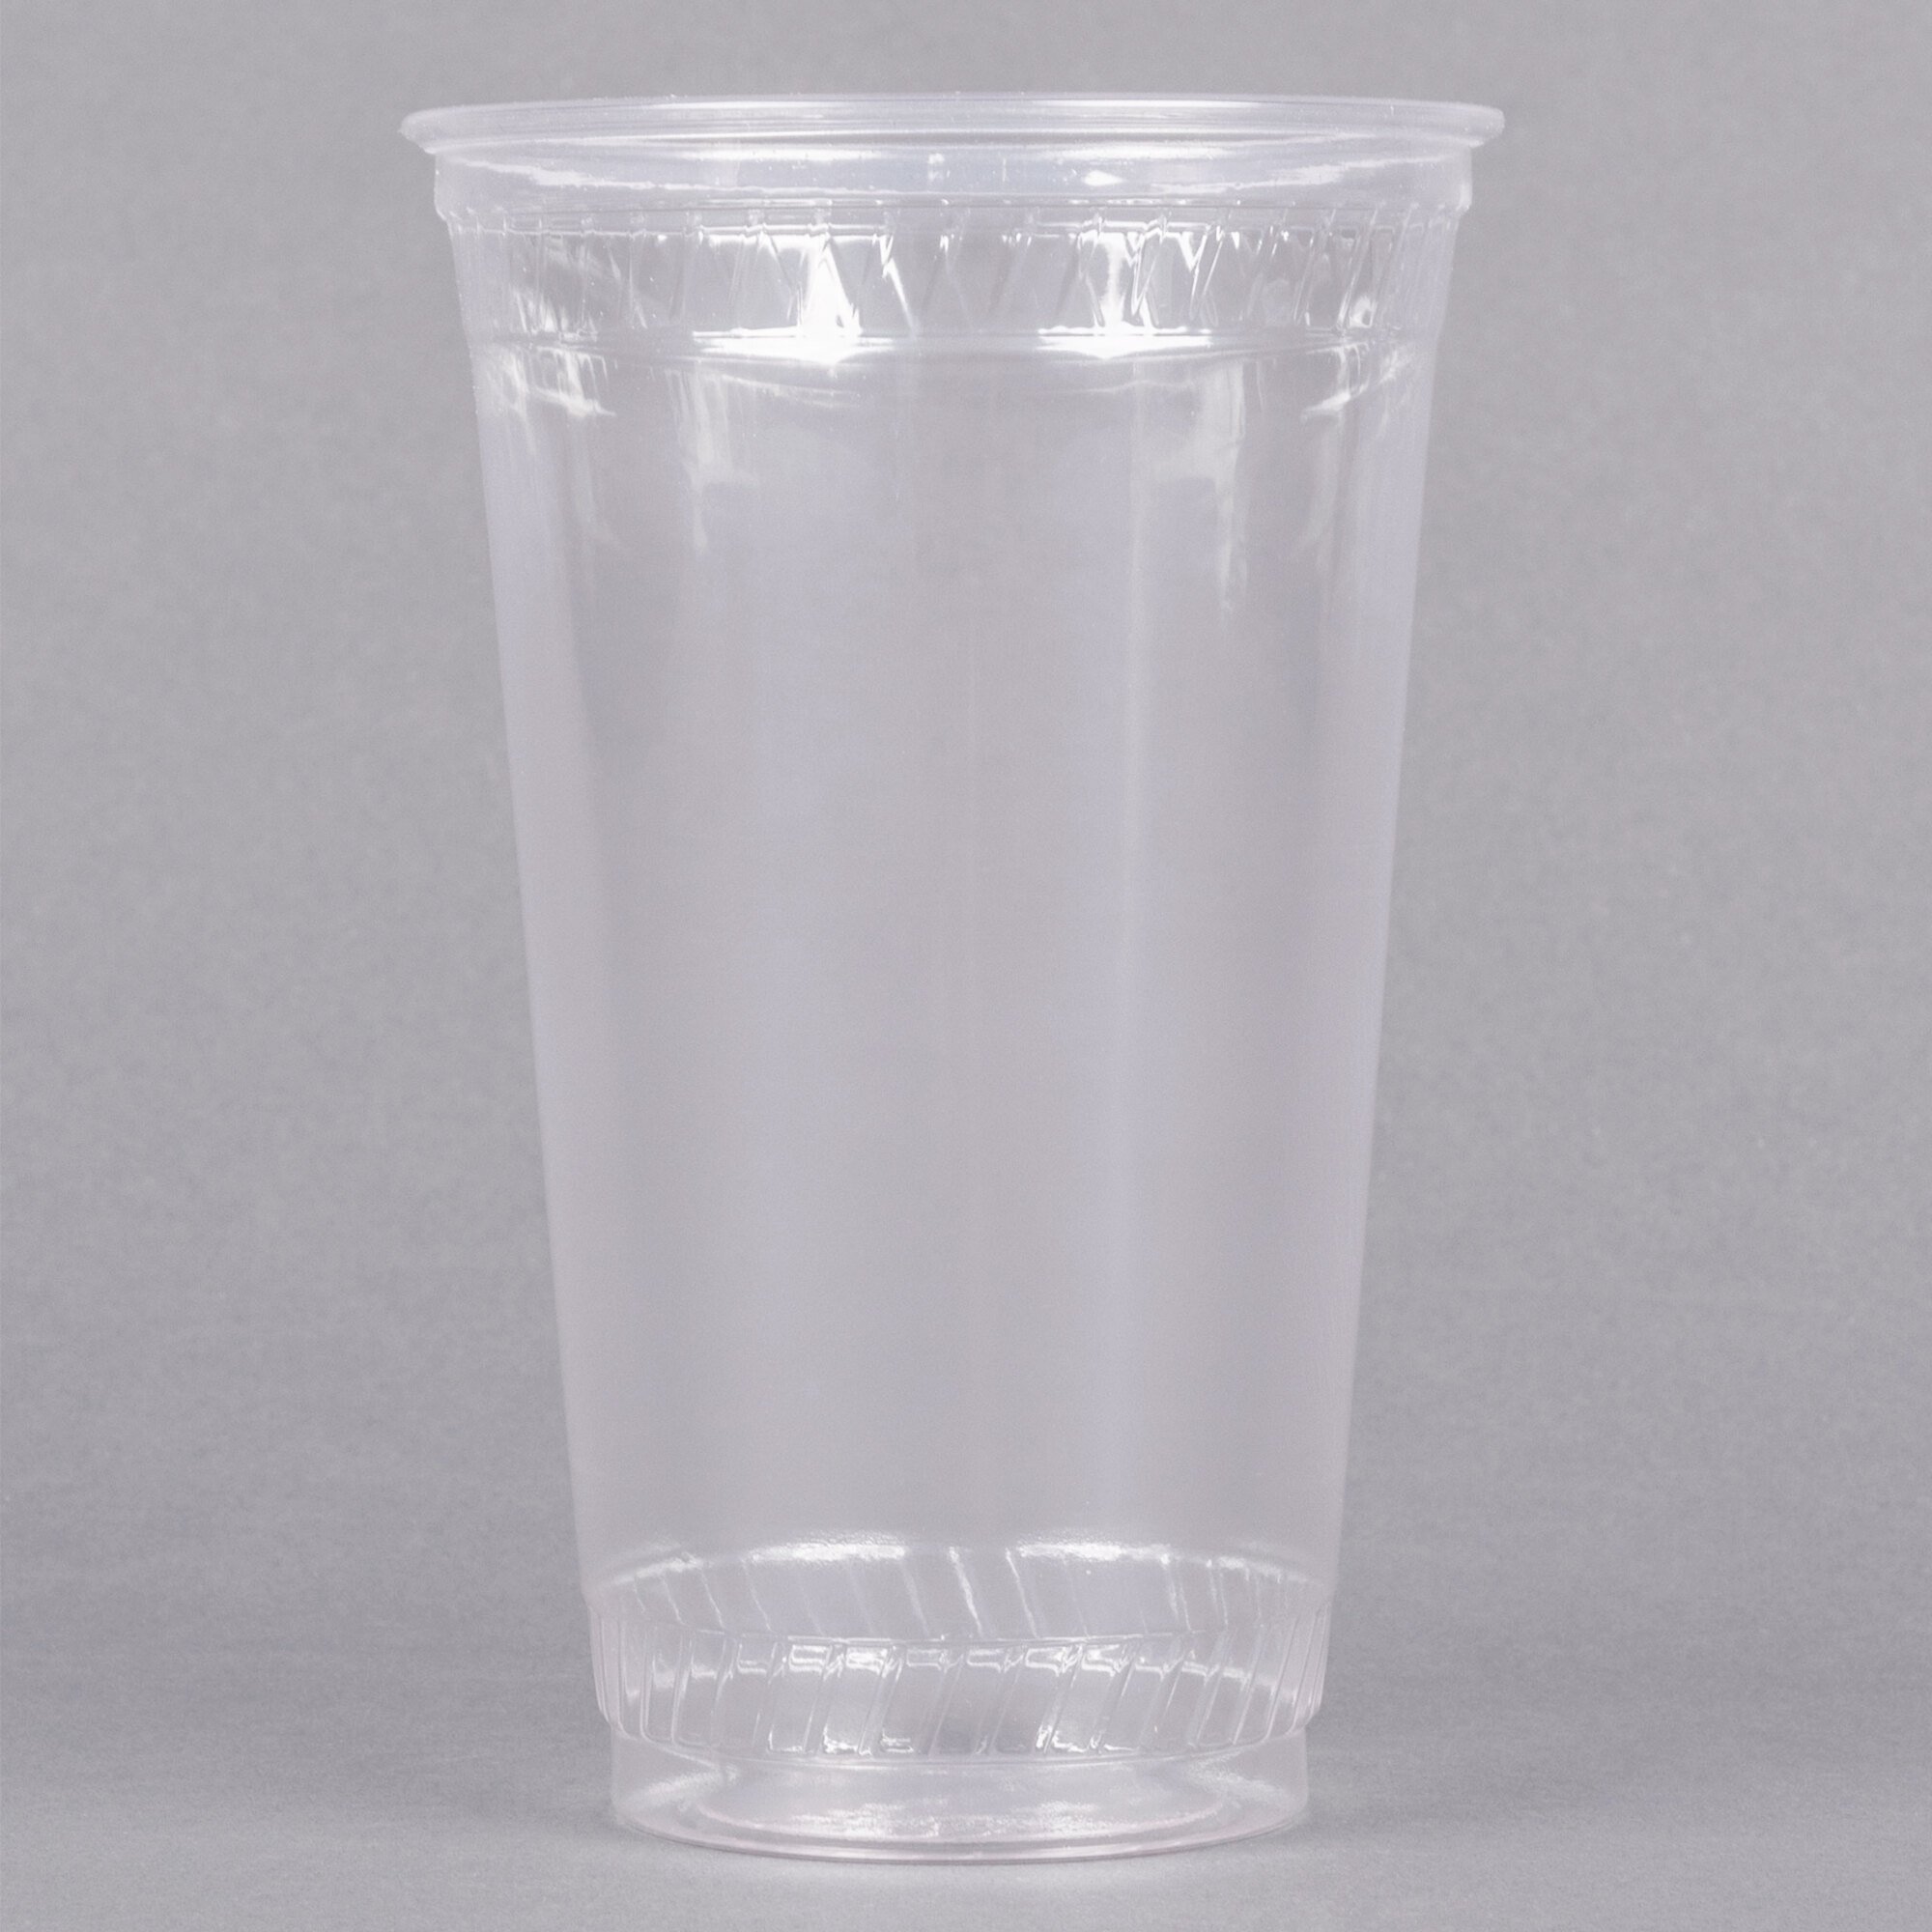 FabriKal GC24 Greenware 24 oz. Compostable Clear Plastic